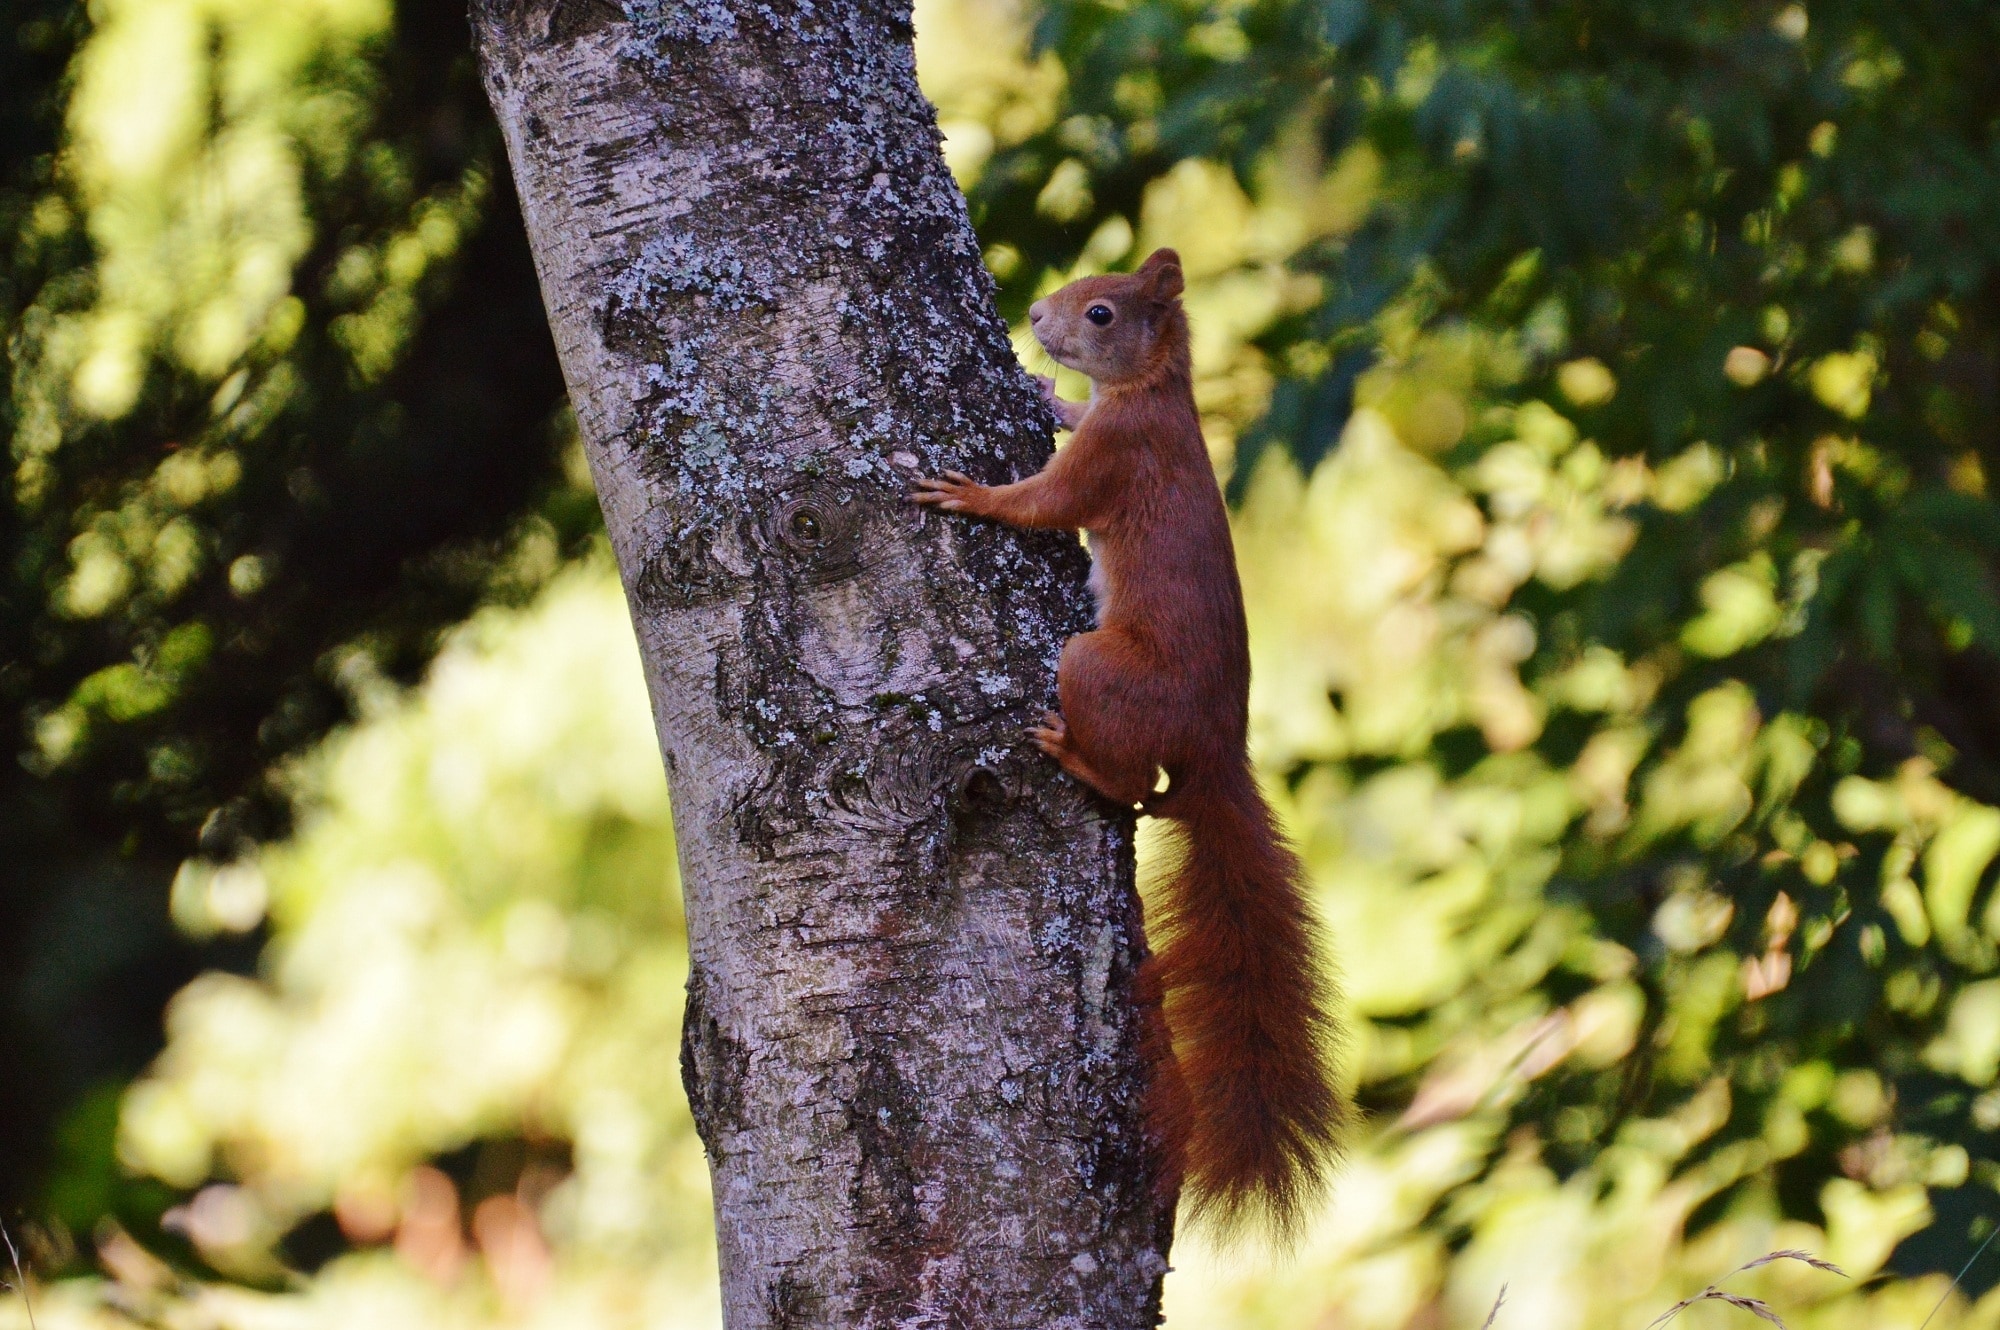 Nature, Nager, Squirrel, Rodent, Cute, tree trunk, one animal